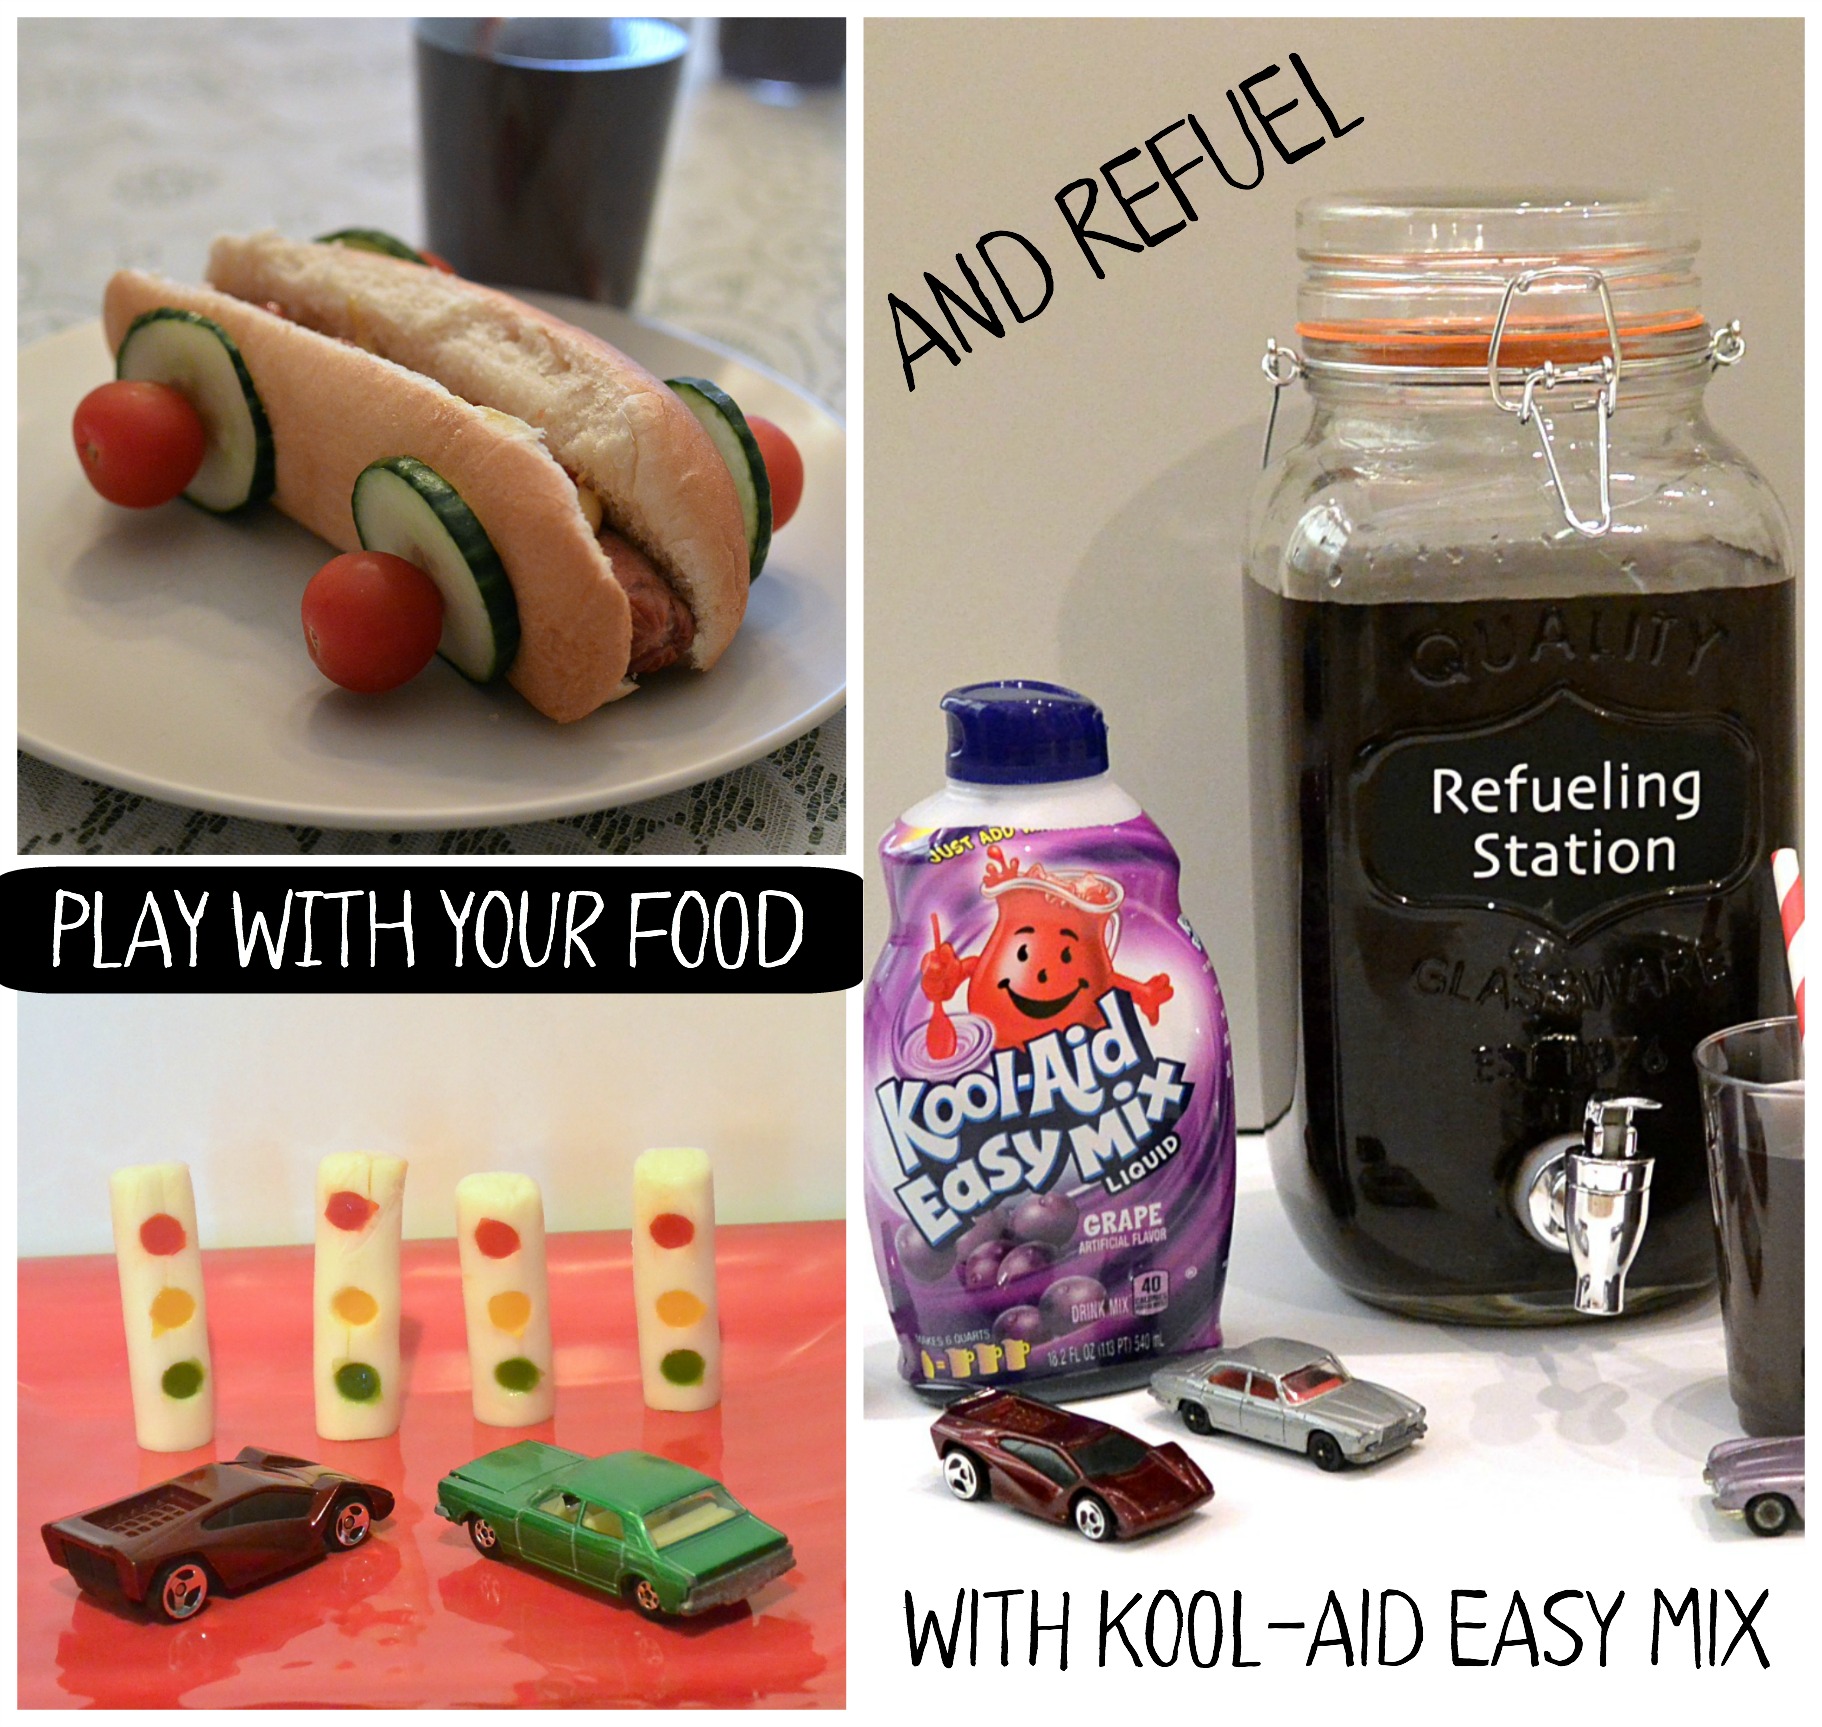 Play with your food and refuel with Kool-Aid Easy Mix.